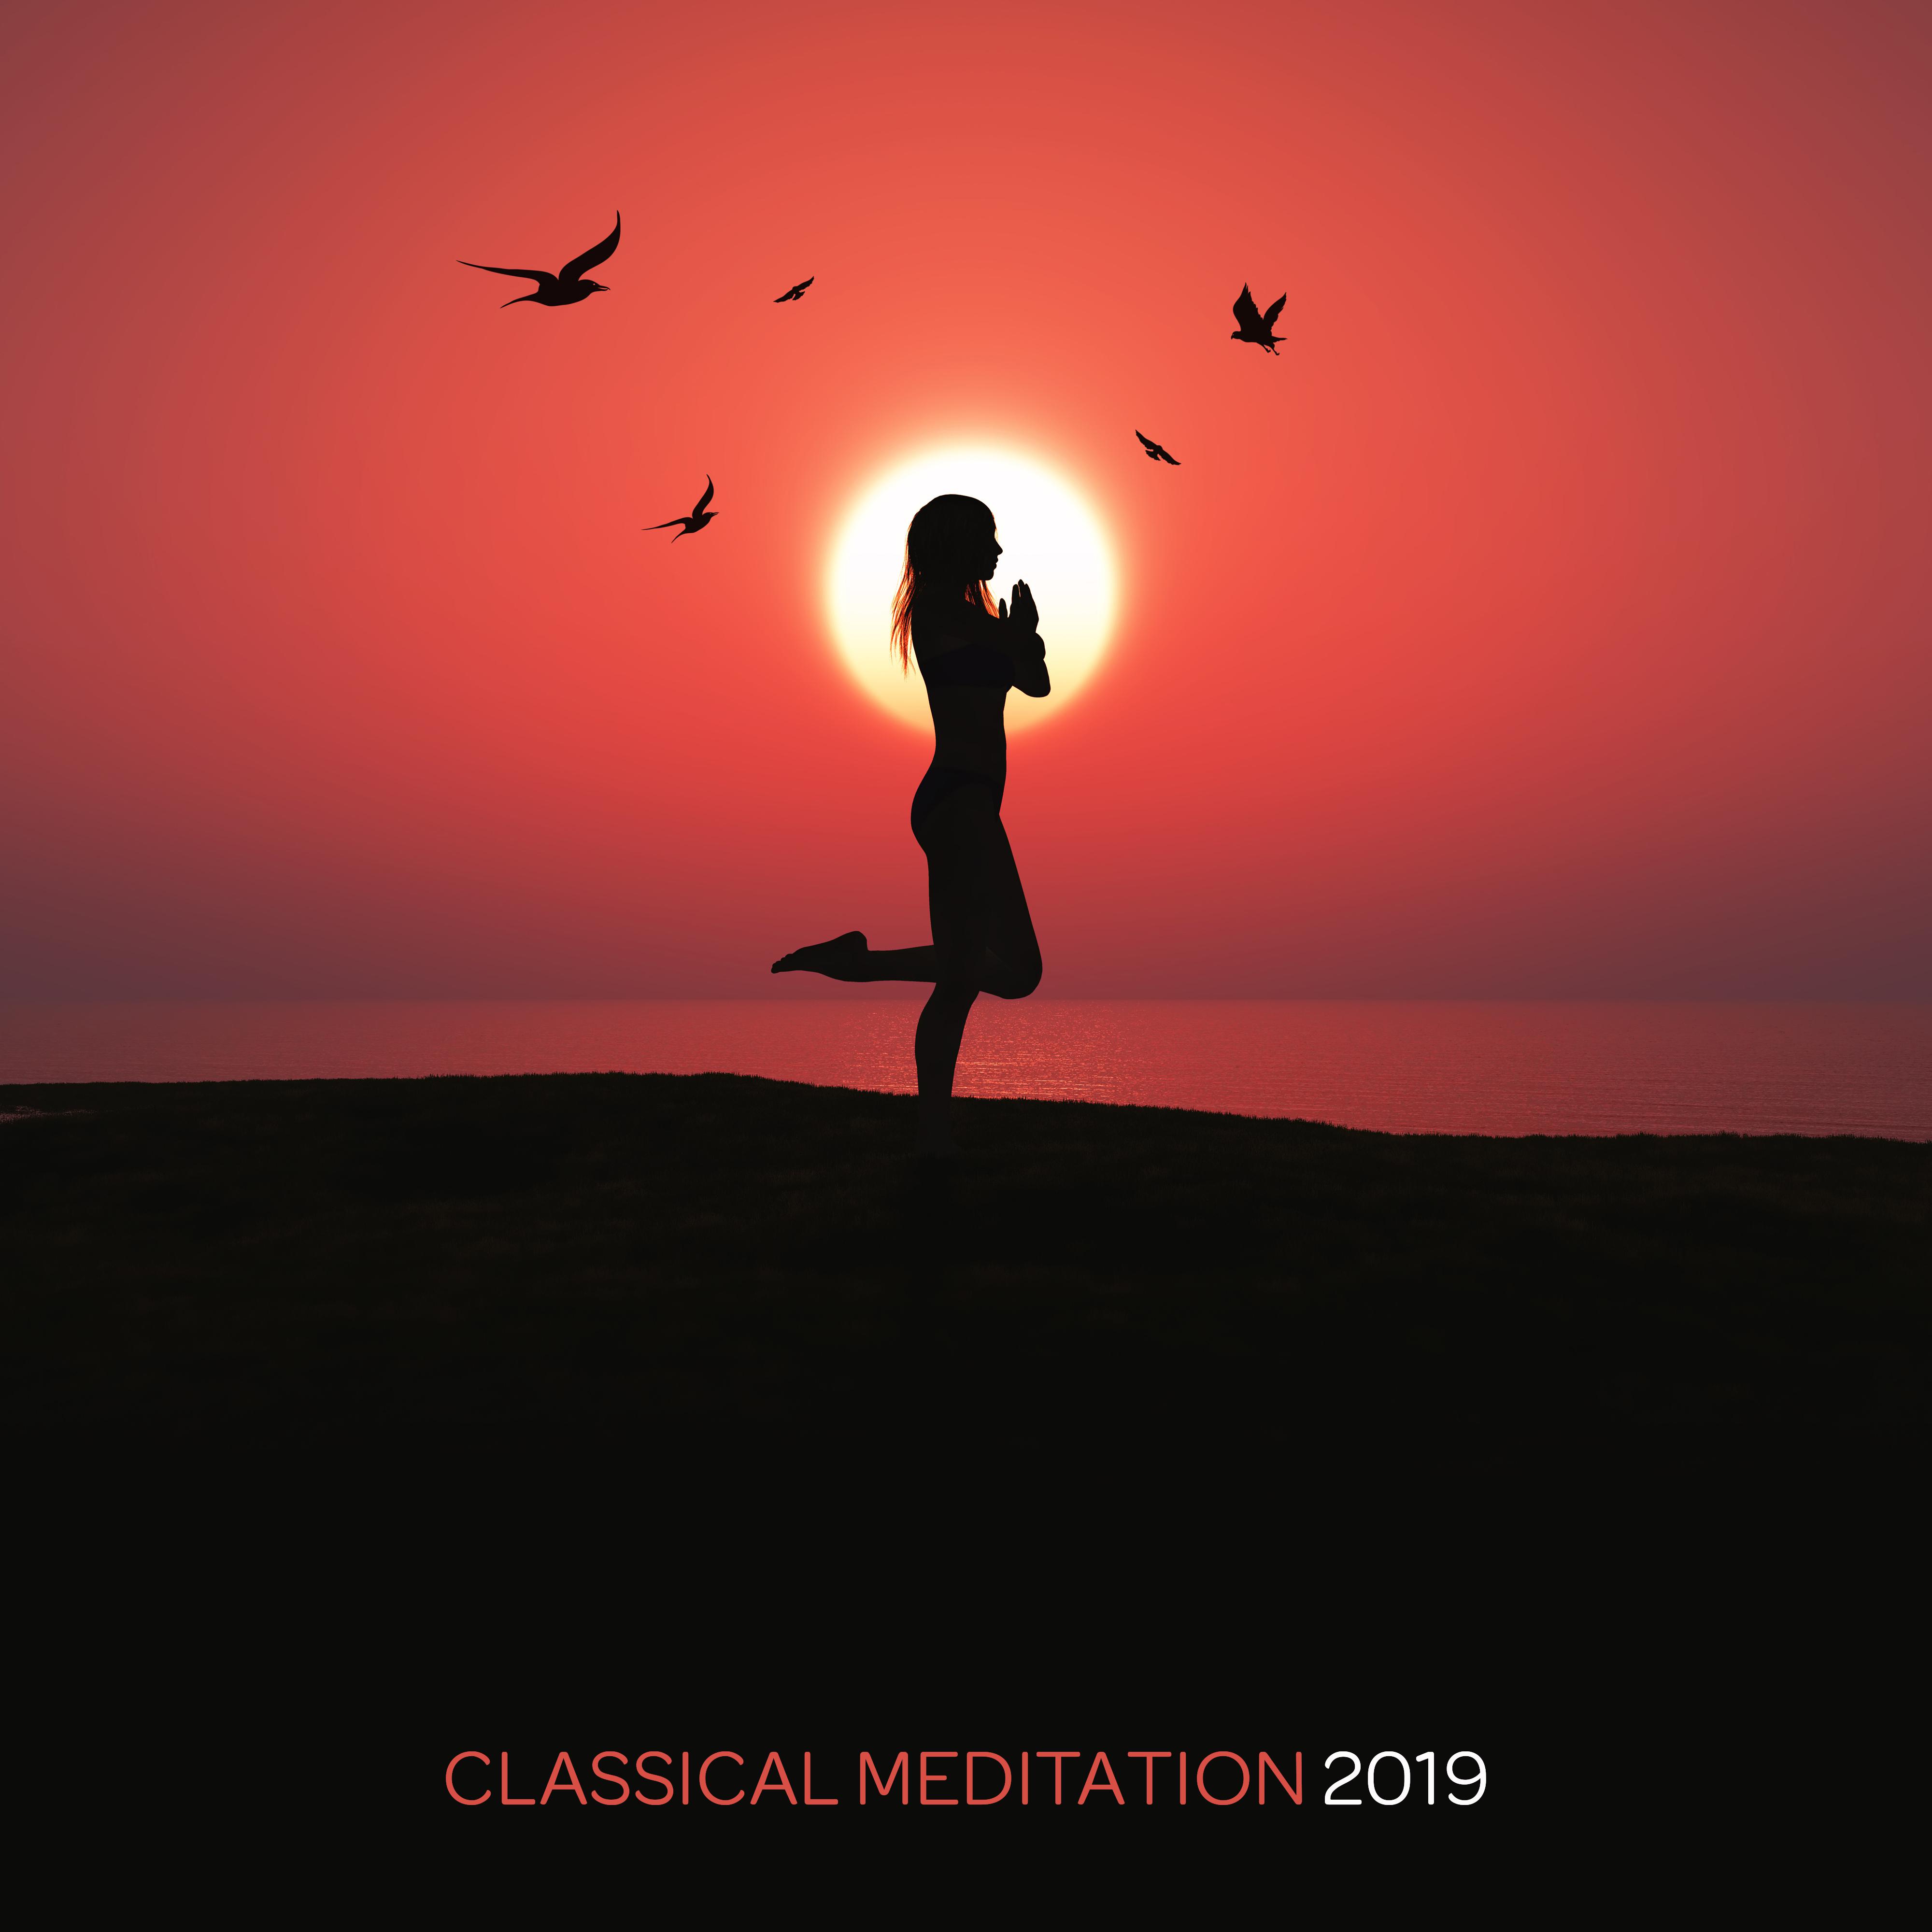 Classical Meditation 2019 – Meditation Music Zone, Yoga Meditation, Yoga Bliss, Mindful Meditation, Reiki Healing, Soothing Sounds for Relaxation, Sleep, Yoga